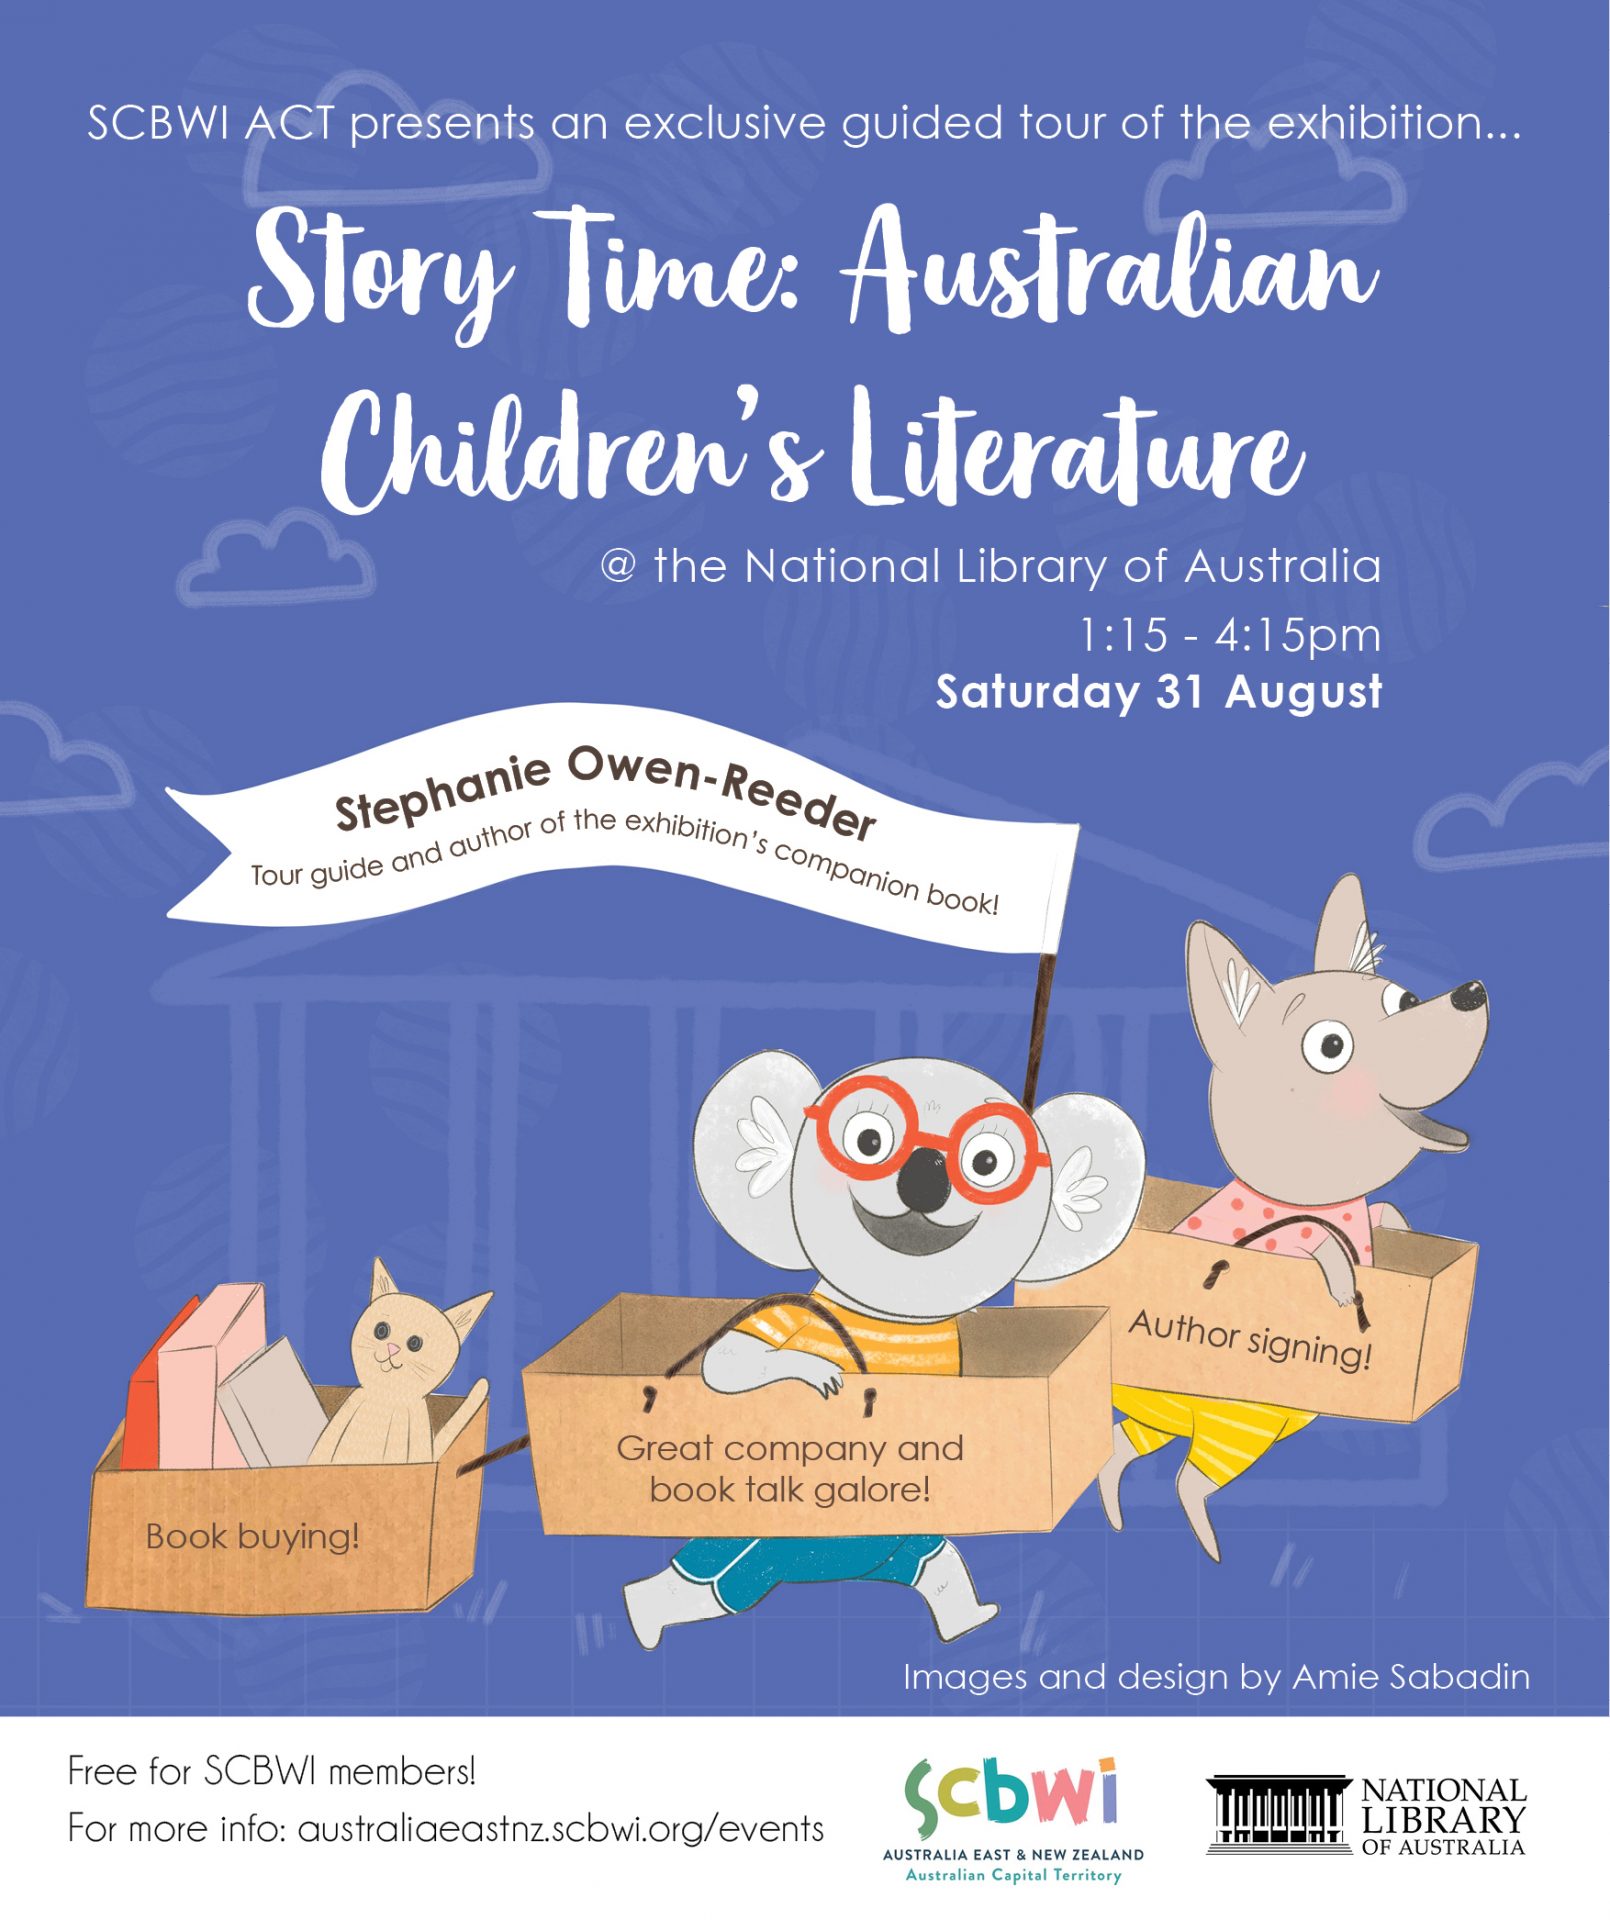 Design and illustration for a SCBWI ACT event at the National Library of Australia.